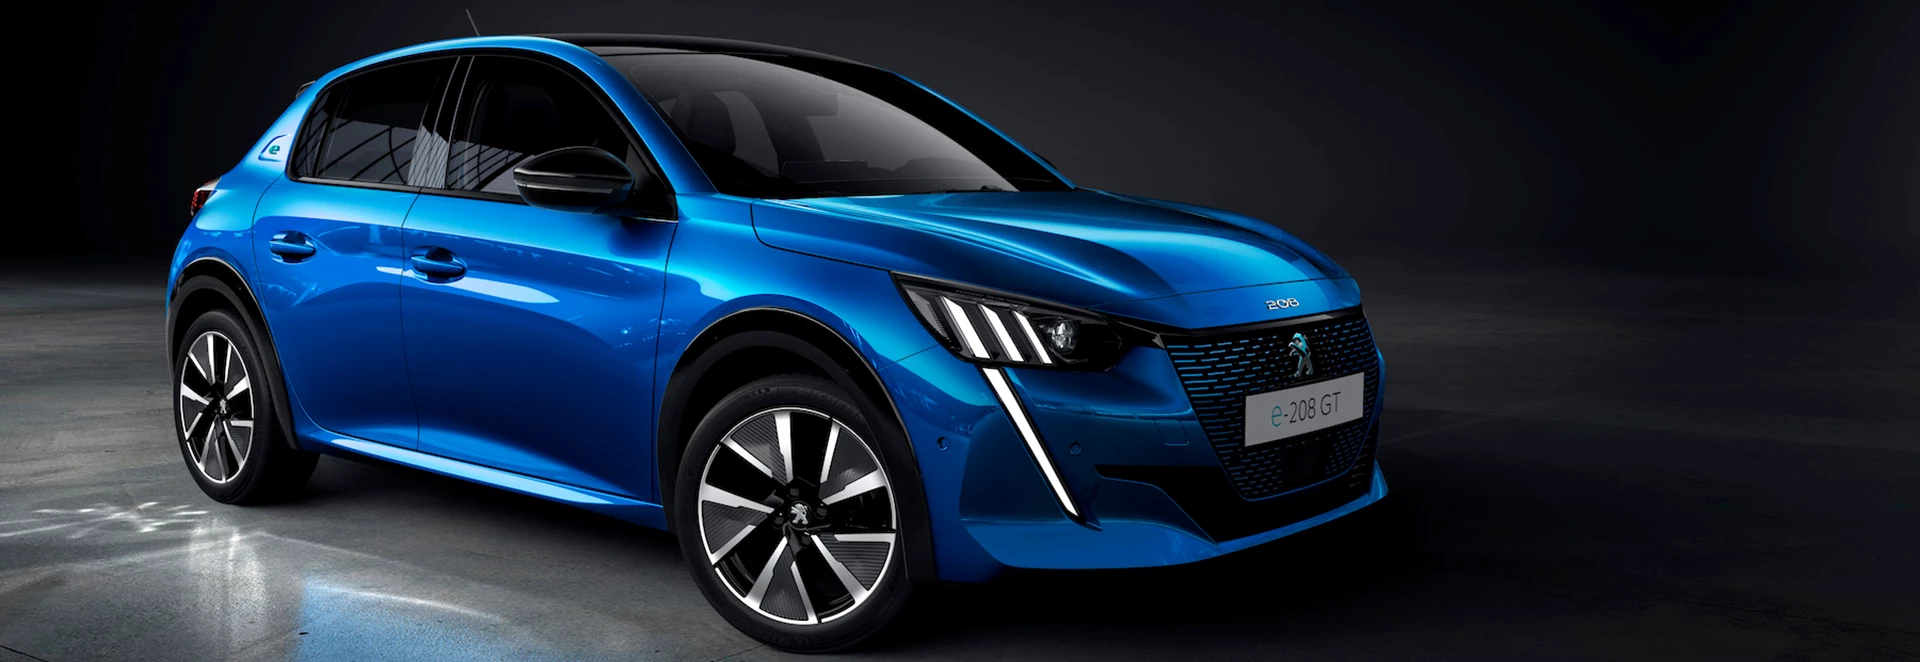 Prices announced for new Peugeot 208 and electric e-208